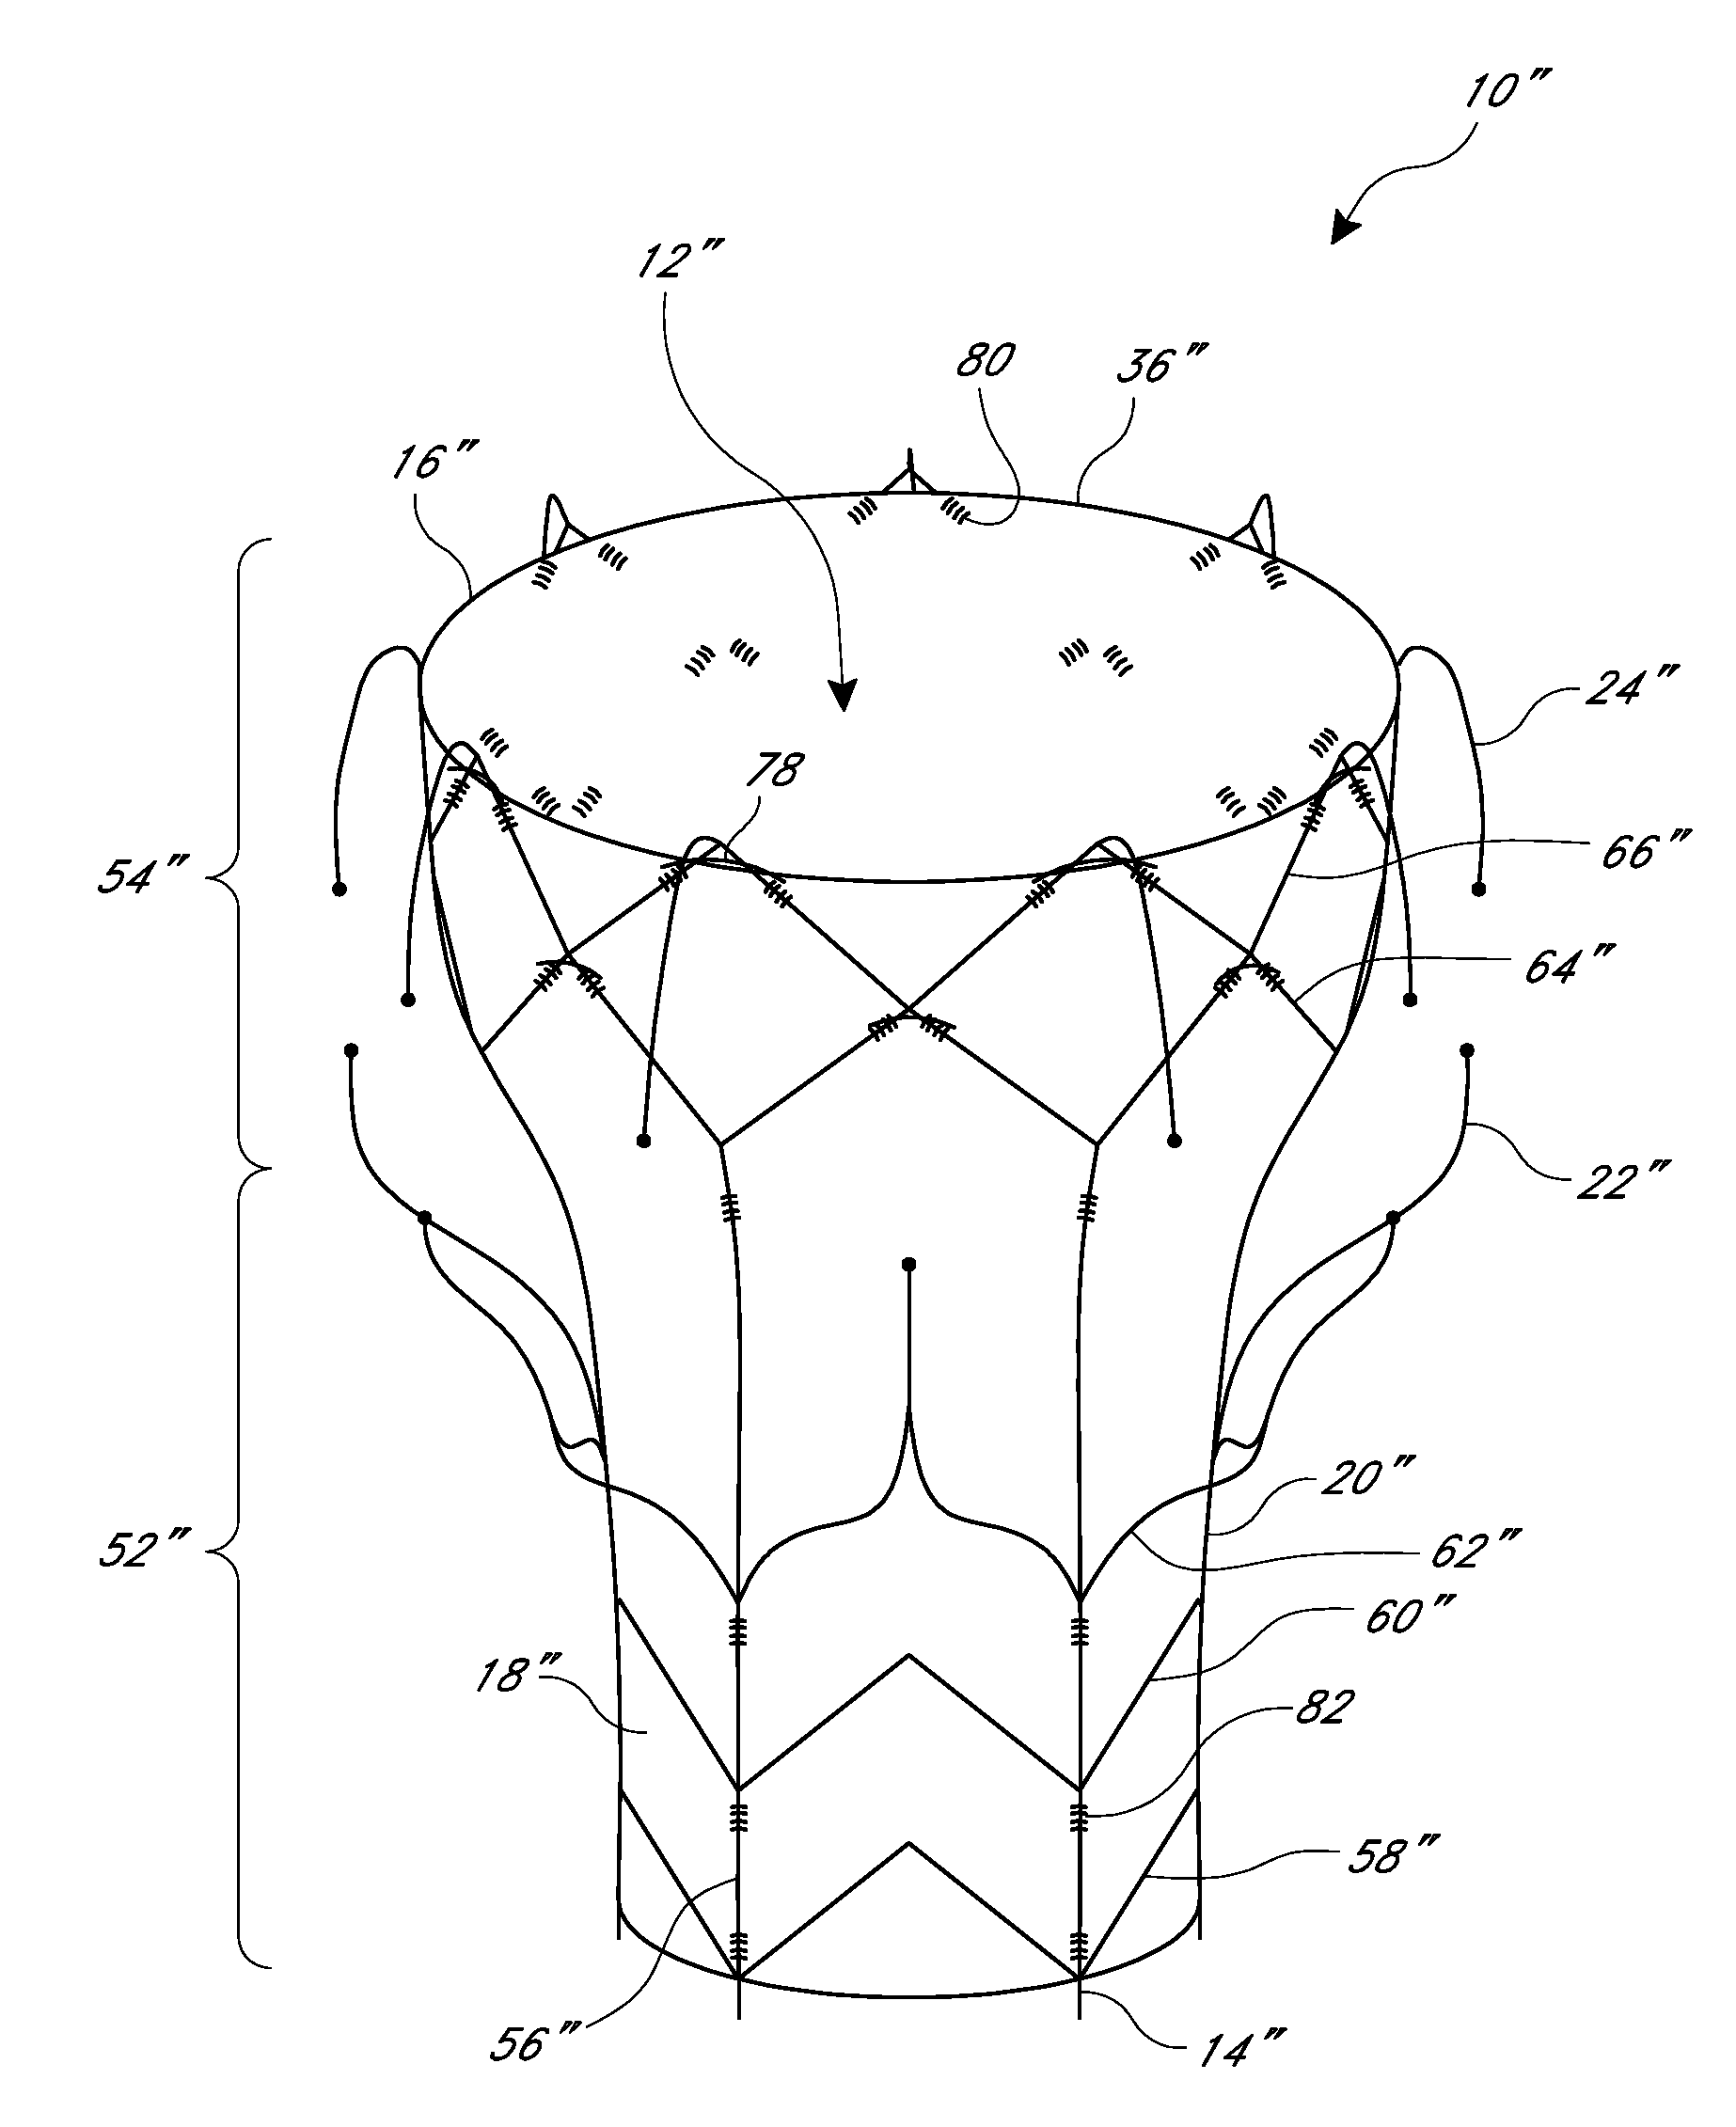 Replacement heart valves, delivery devices and methods